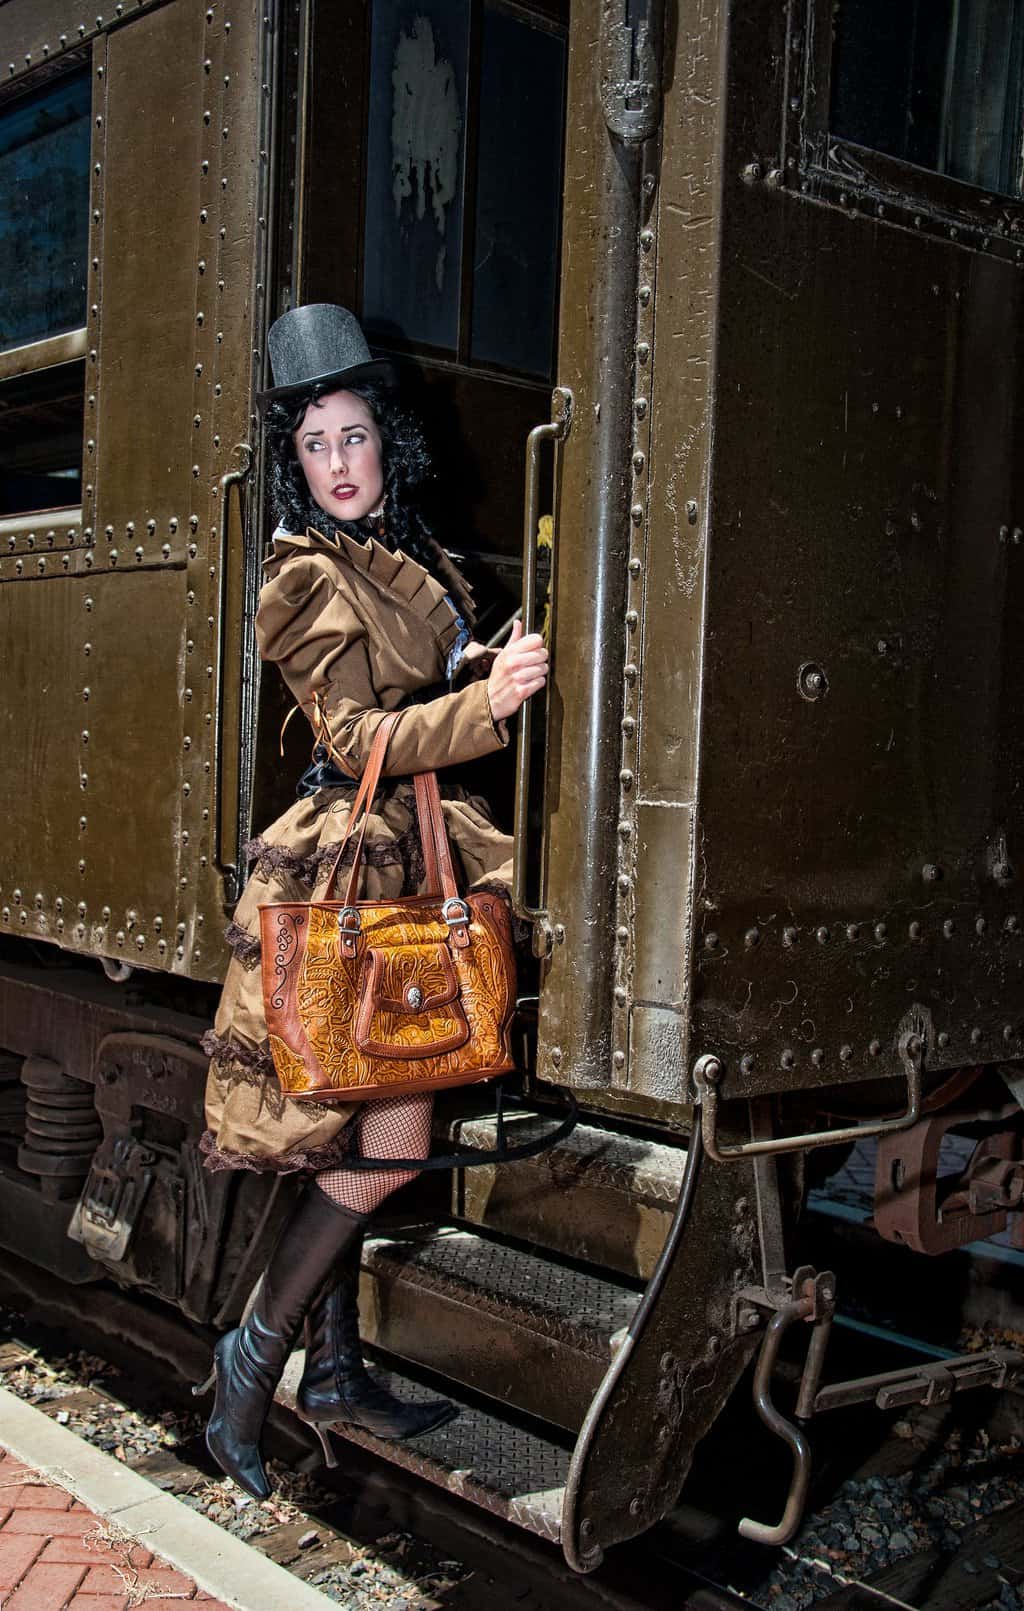 Do you love Steampunk? Bring the family and celebrate the fantasy, history, and ingenuity behind Steampunk on Saturday, March 17 and Sunday, March 18 at the Iron Horse Family Steampunk Carnivale at the Orange Empire Railway Museum in Perris, California. Tickets are now on sale for this yearly event.